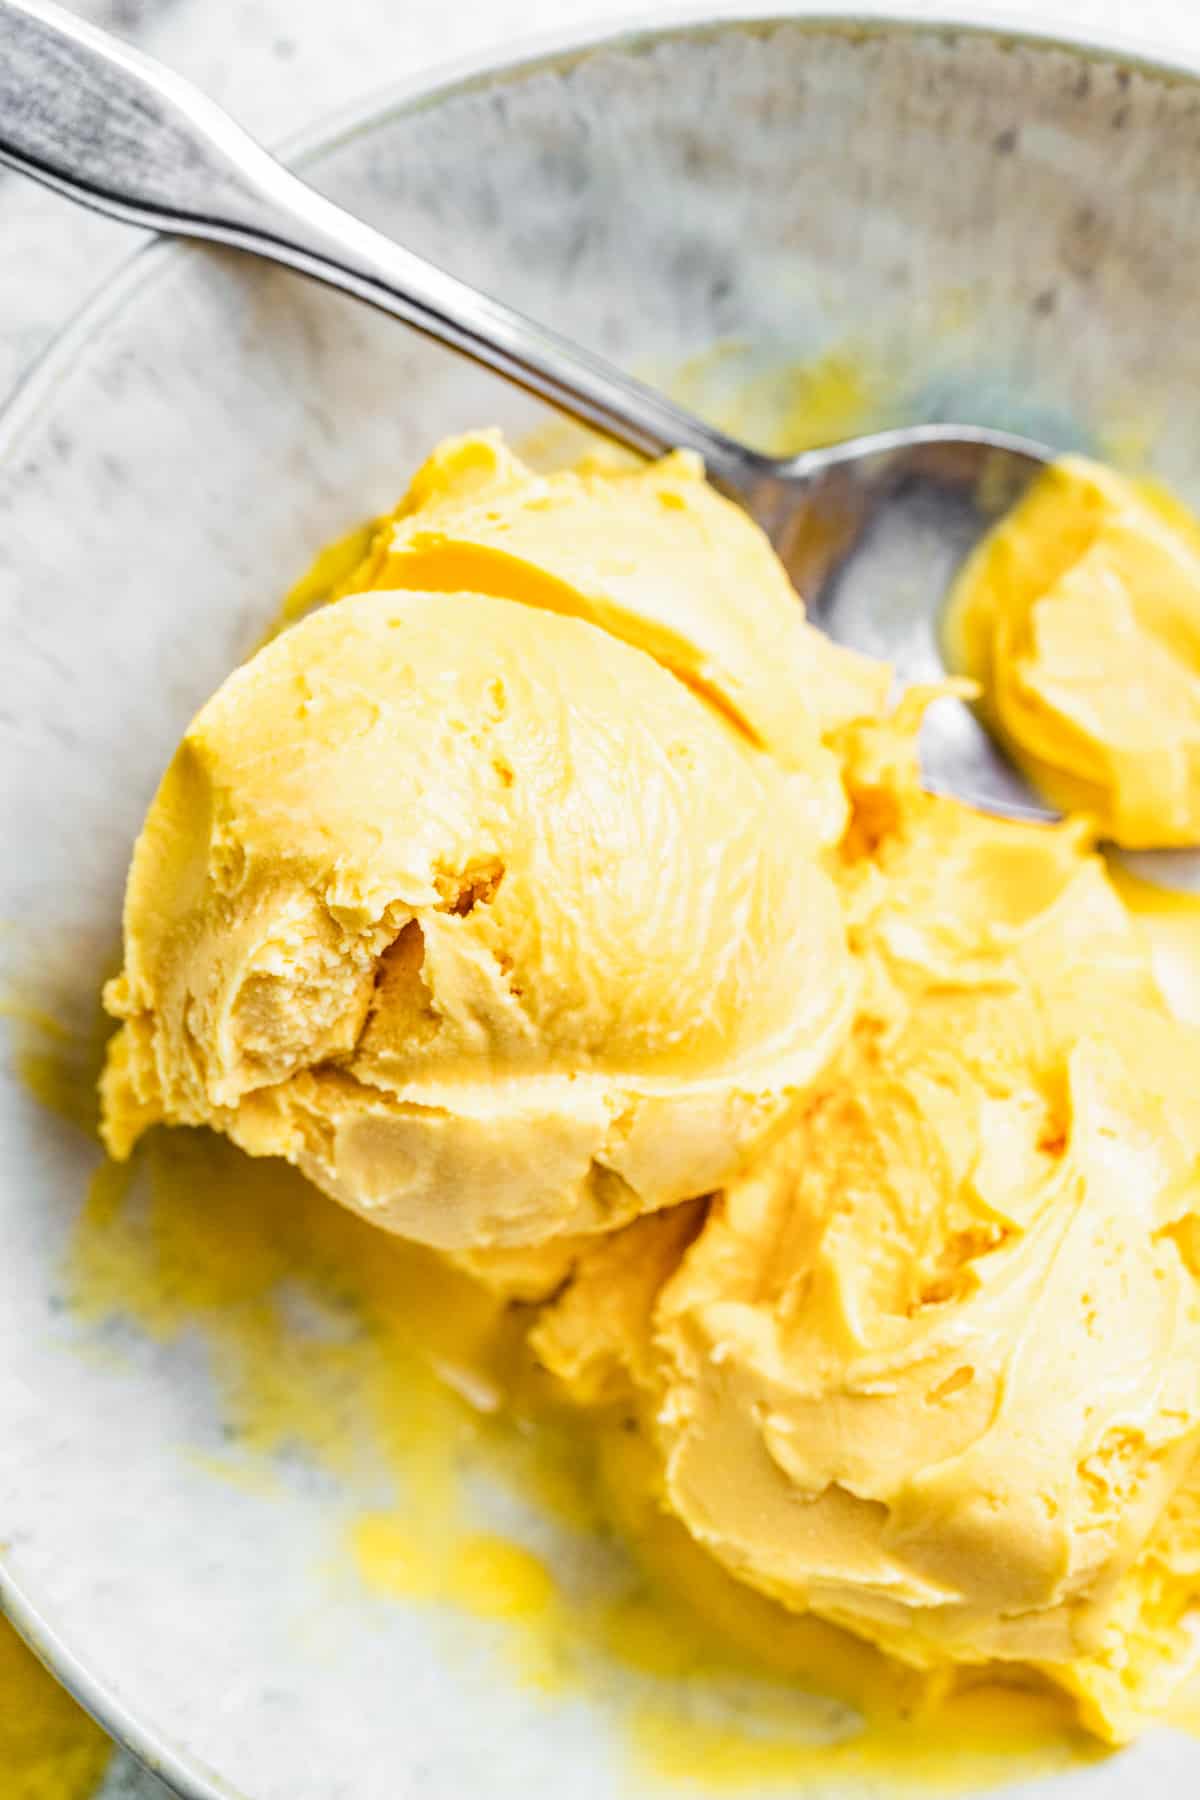 Two scoops of mango ice cream in a bowl with a spoon.